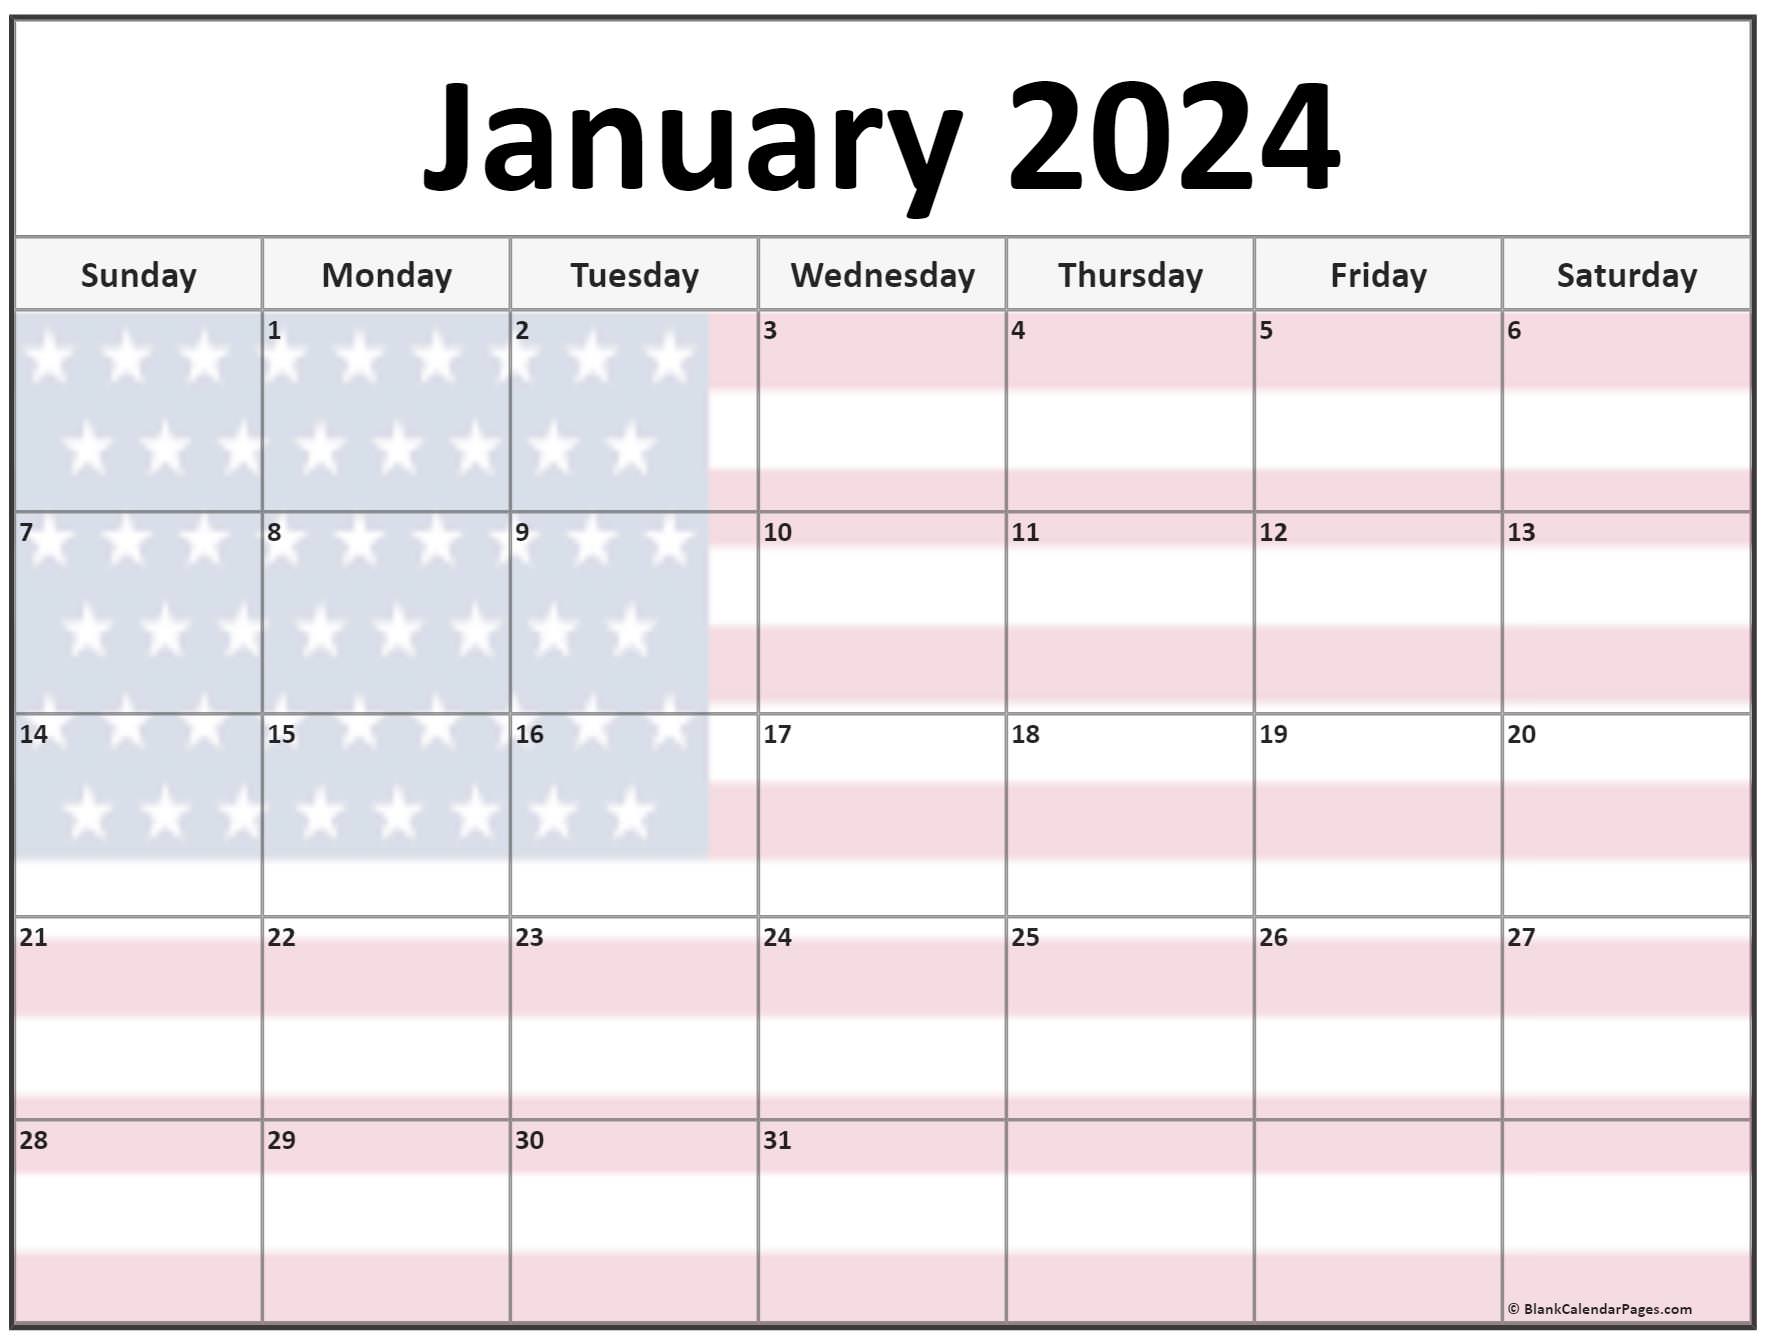 collection of january 2022 photo calendars with image filters